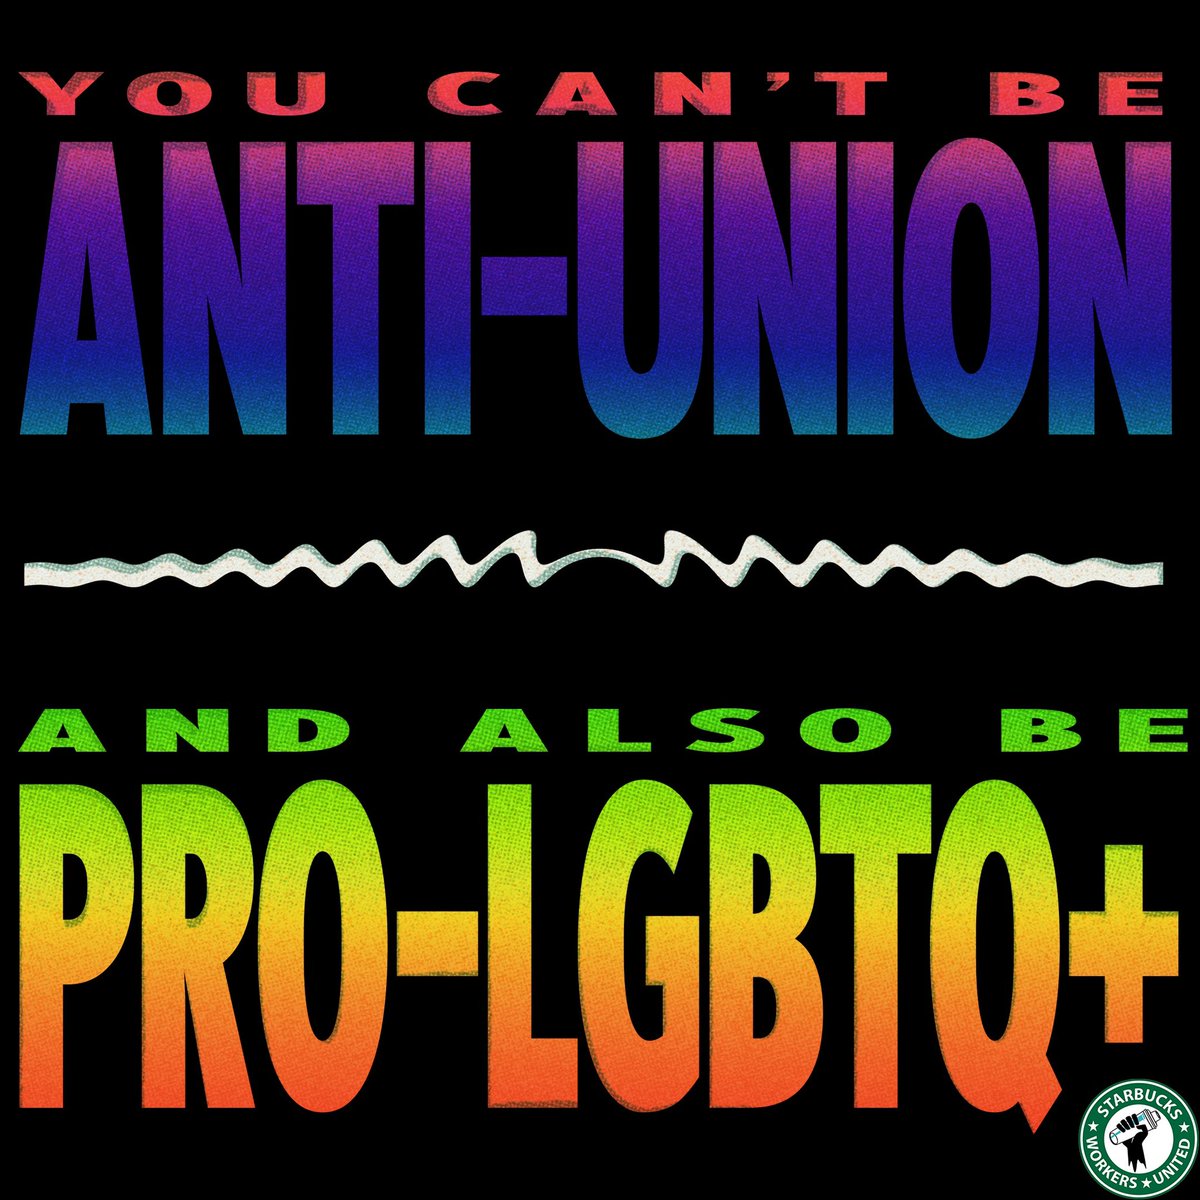 This Pride let’s set the record straight — Starbucks is not pro-LGBTQ. They do not take care of their queer workers. They are not an ally. They are a corporation waging a war against their workers who are fighting for protections. Enough of corporate performatism - we want more.